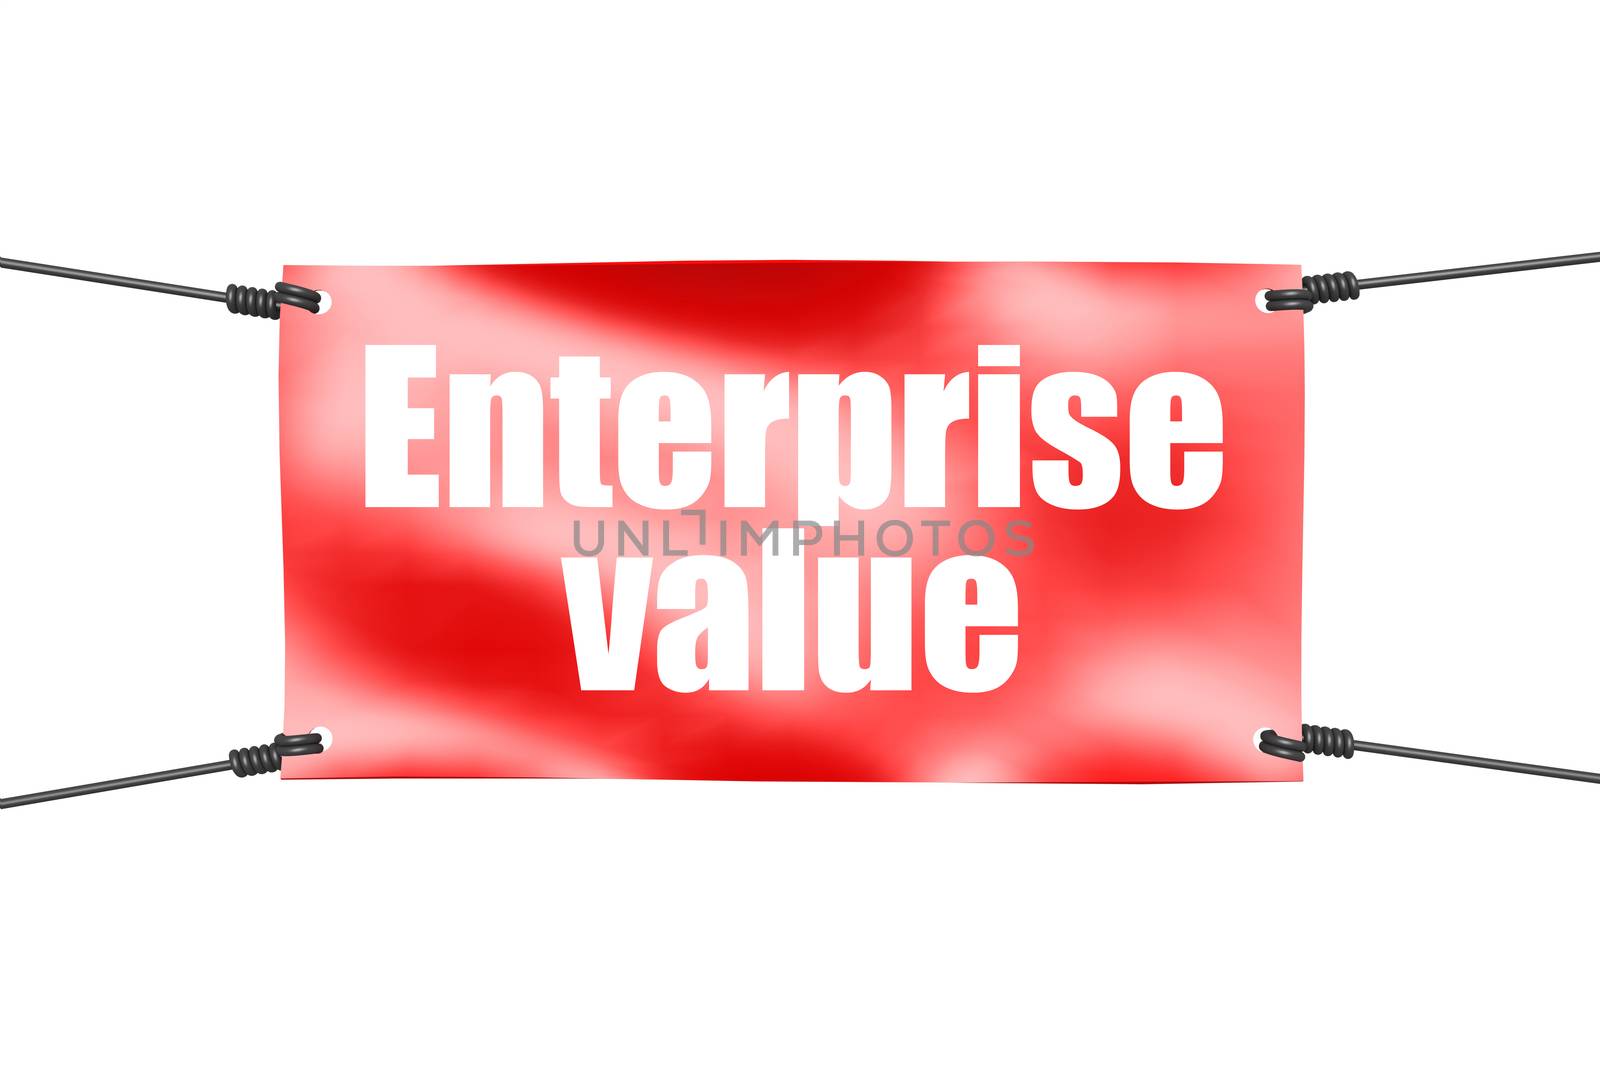 Enterprise value word with red tie up banner, 3D rendering